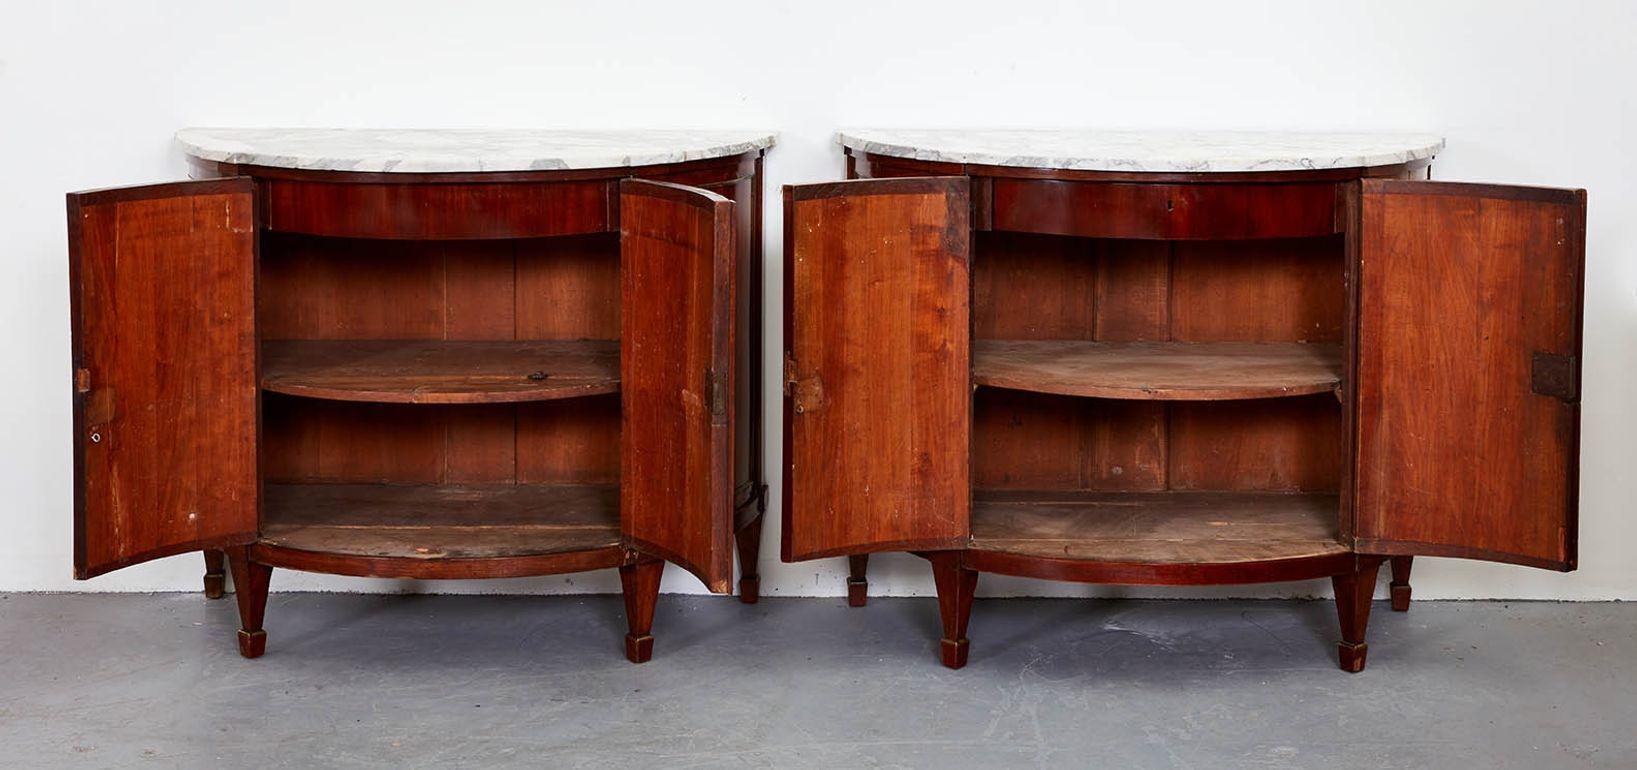 Pair of Neoclassical Demilune Commodes In Good Condition For Sale In Greenwich, CT